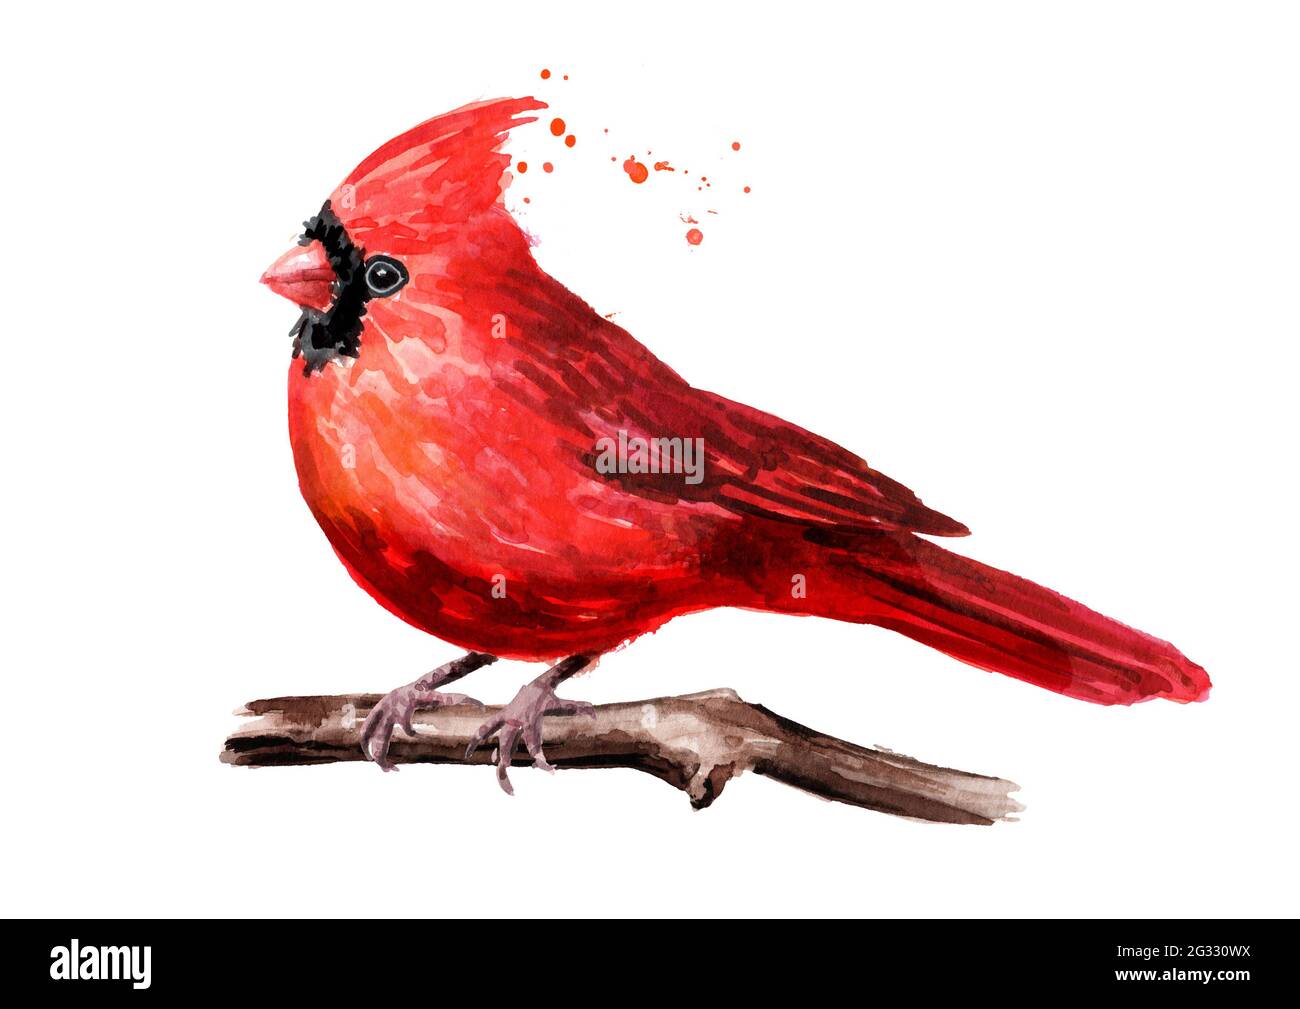 Red Bird Cardinal On The Branch Watercolor Hand Drawn Illustration Isolated On White Background Stock Photo Alamy